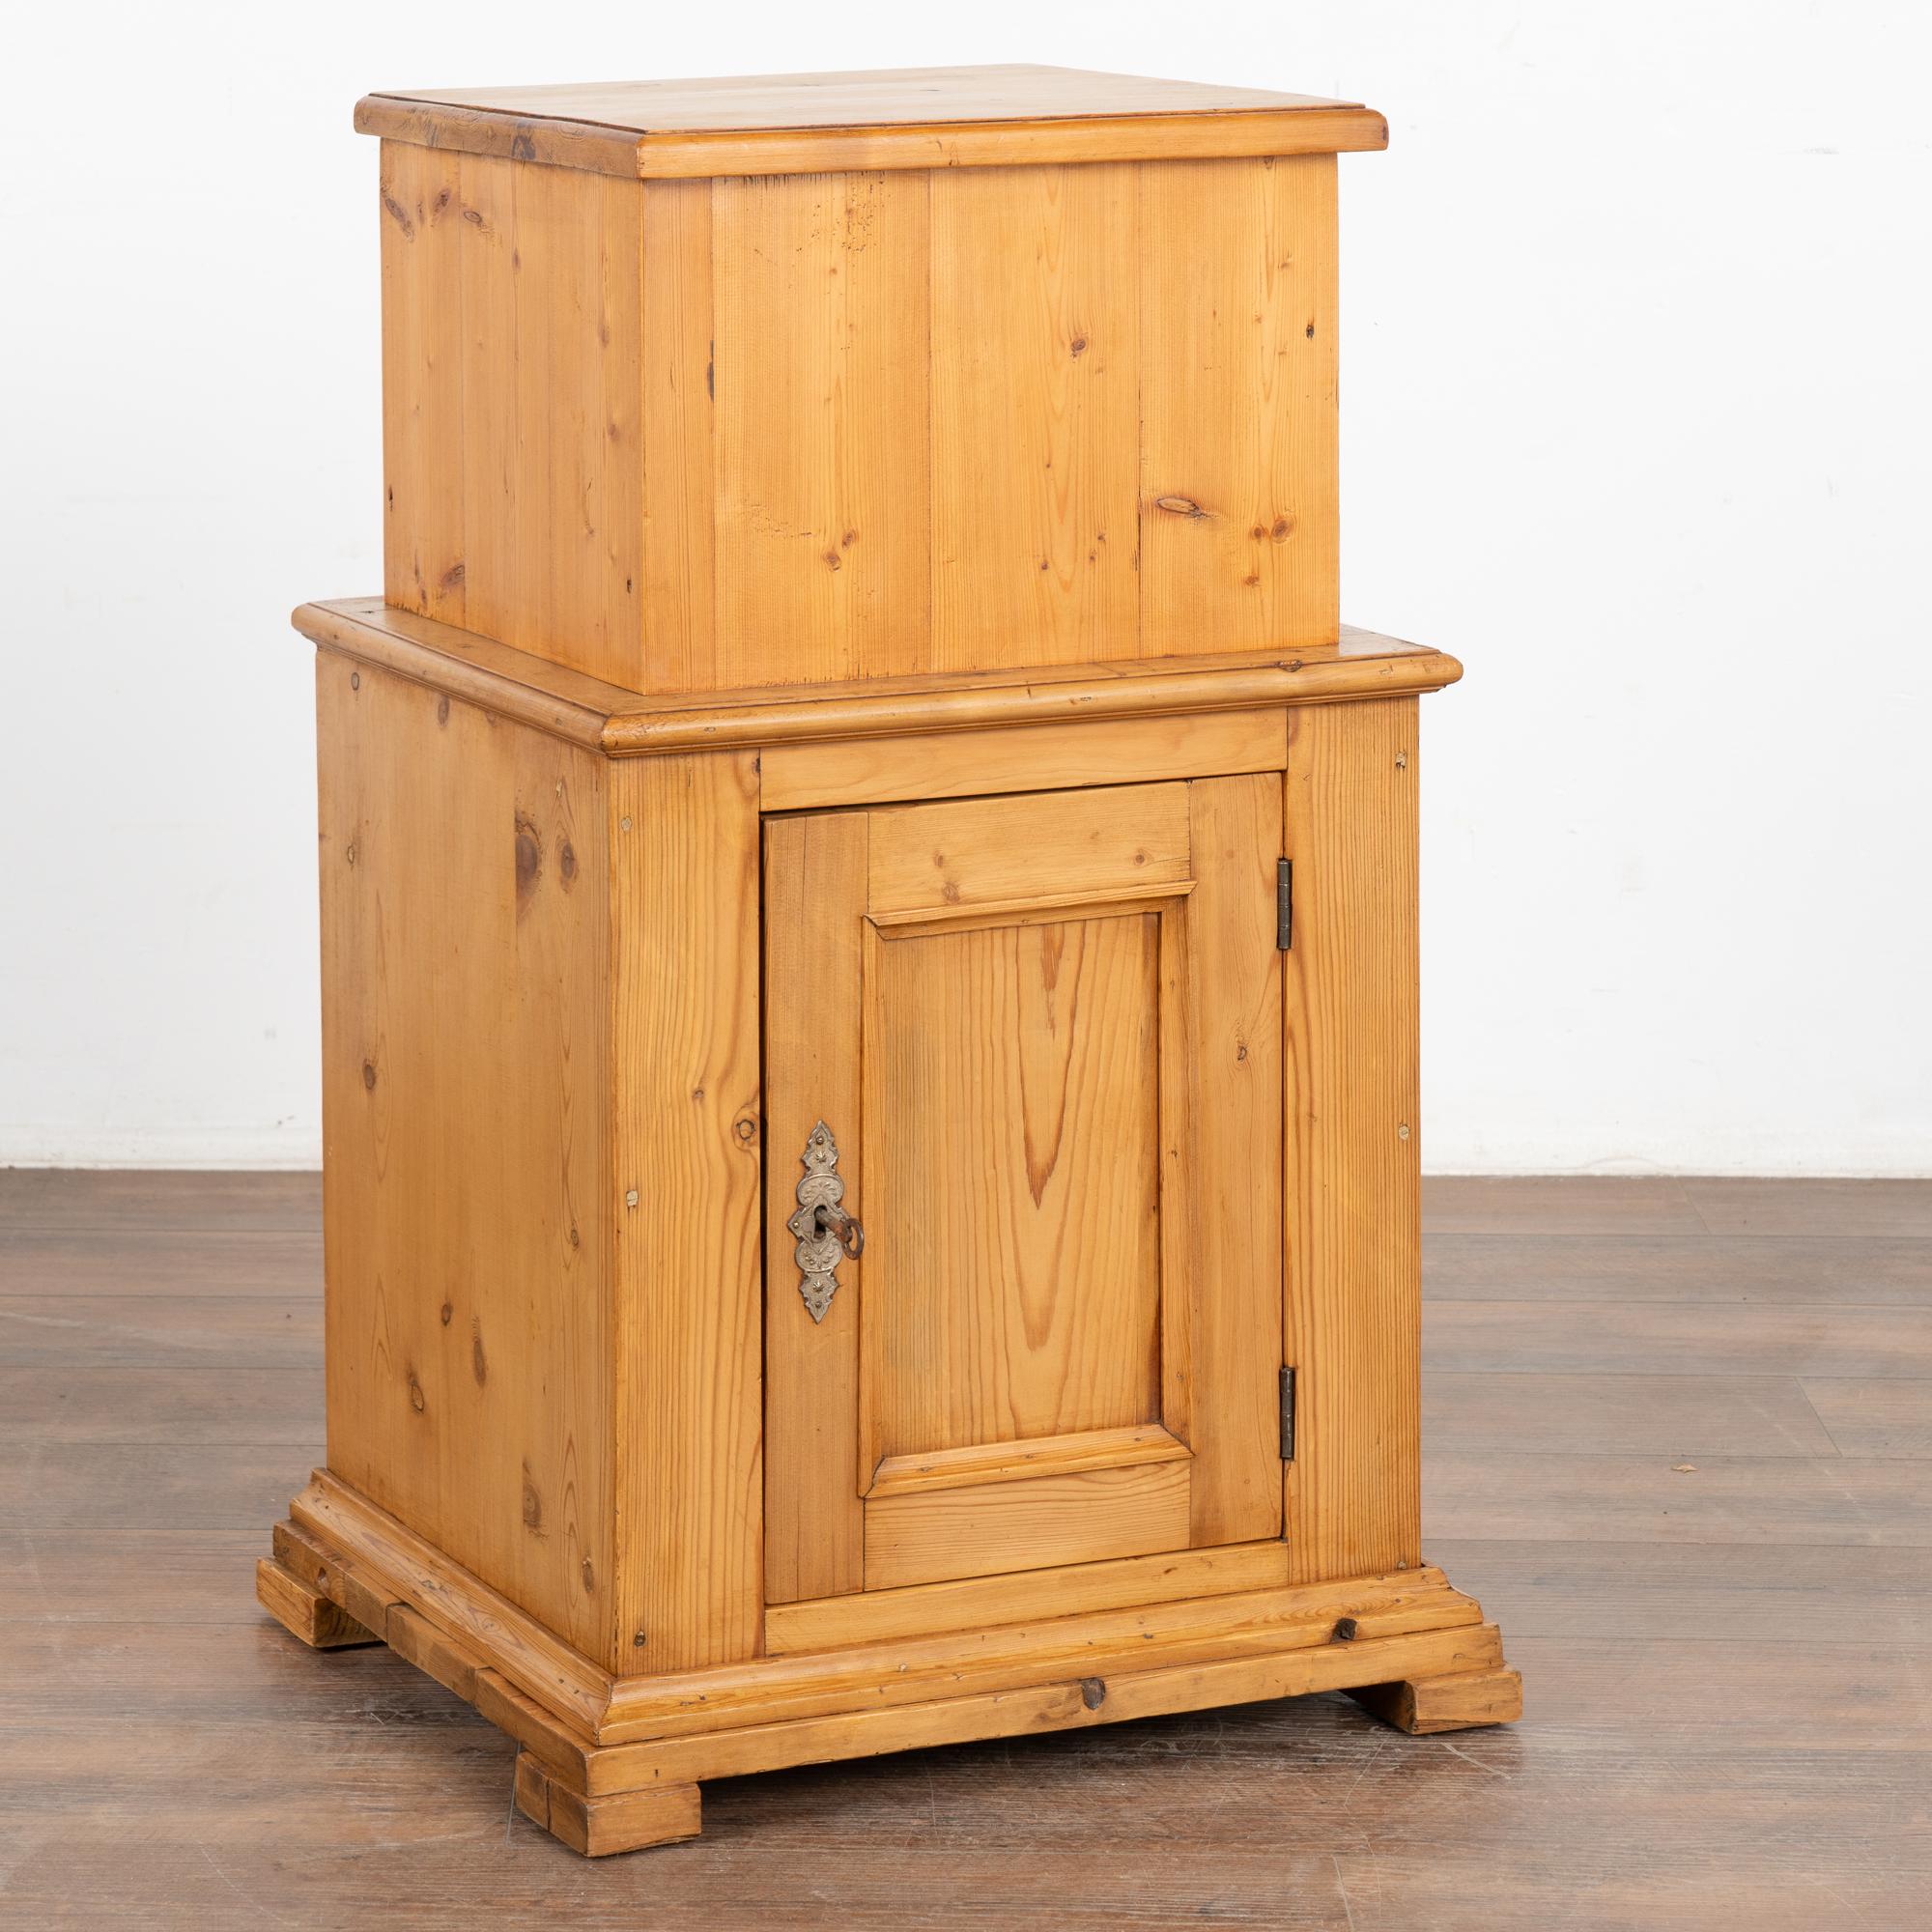 Antique pine nightstand or small cabinet resting on simple block feet.
Note the natural wax finish that brings out the warmth of the pine. Storage is in the lower section only. The upper section (no storage access) raises it to 34.5